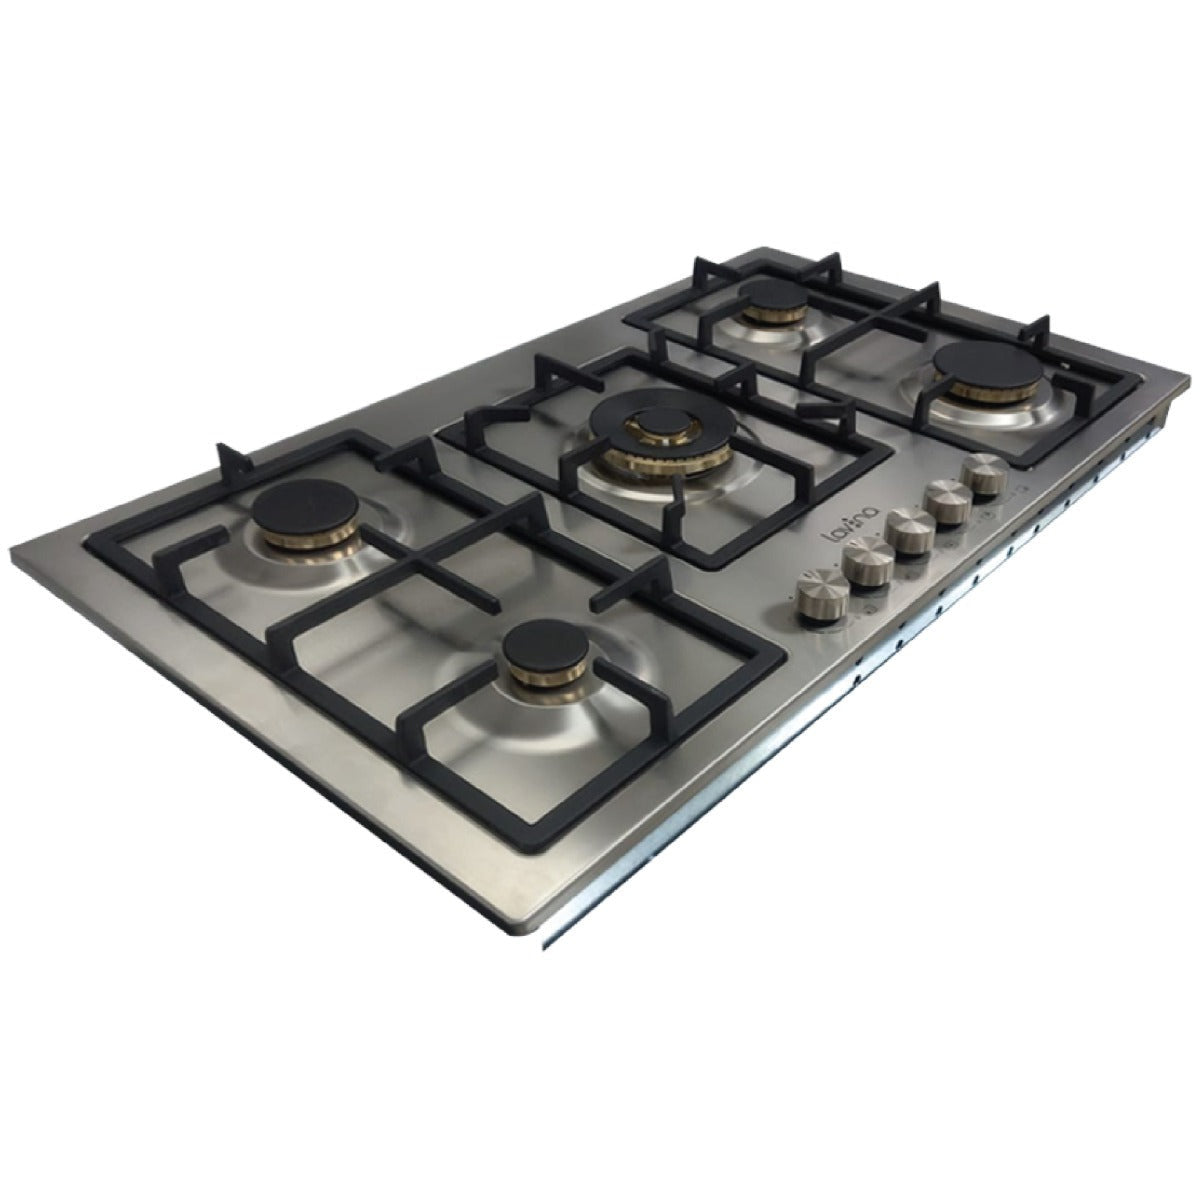 Lavina gas cooker 90 cm, stainless steel, 5 burners LVFQ95CIX